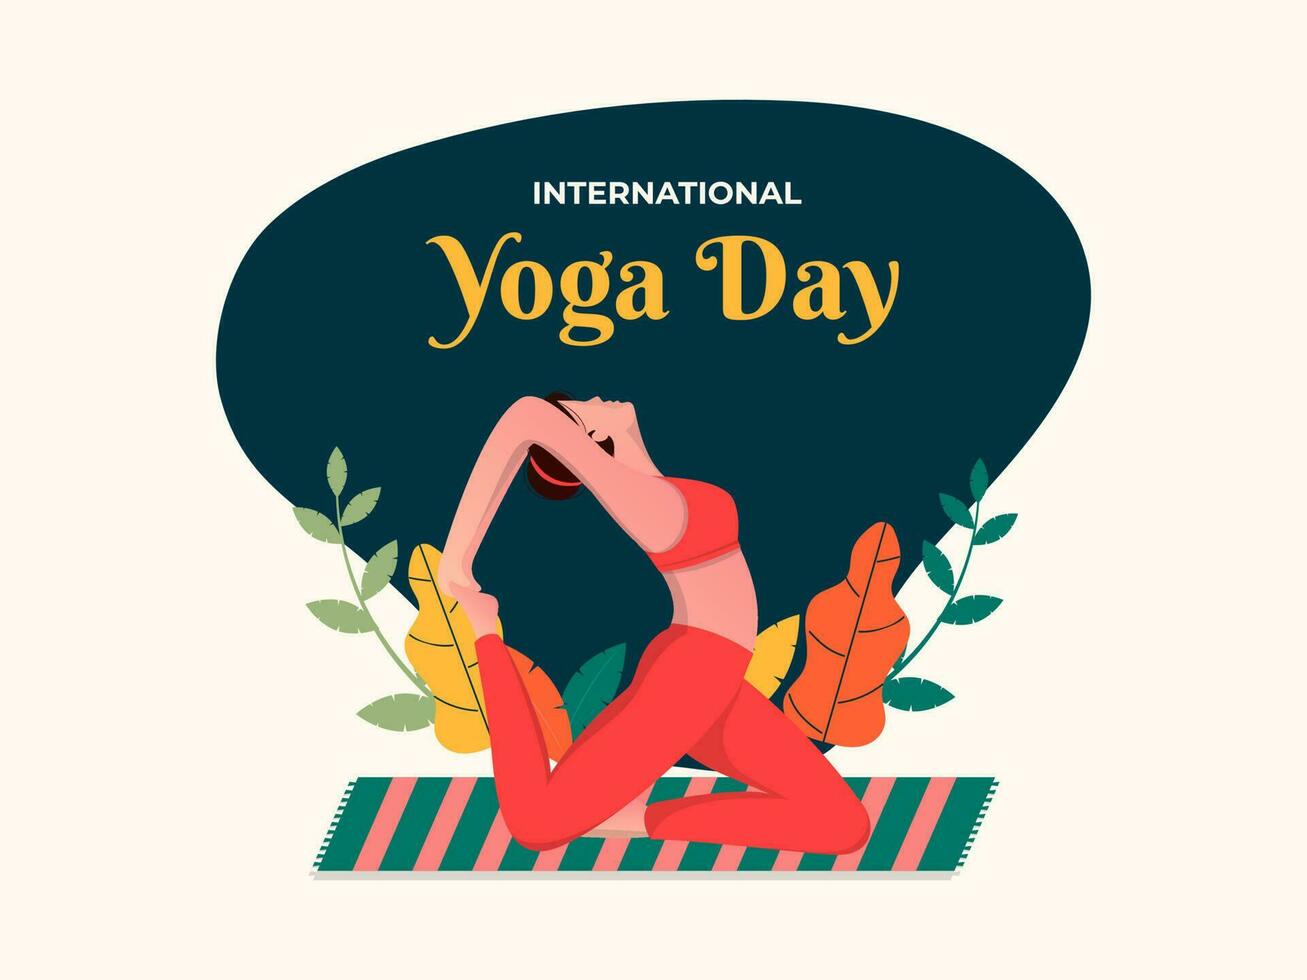 Abstract vintage style poster or banner design for International Yoga Day Celebration. vector